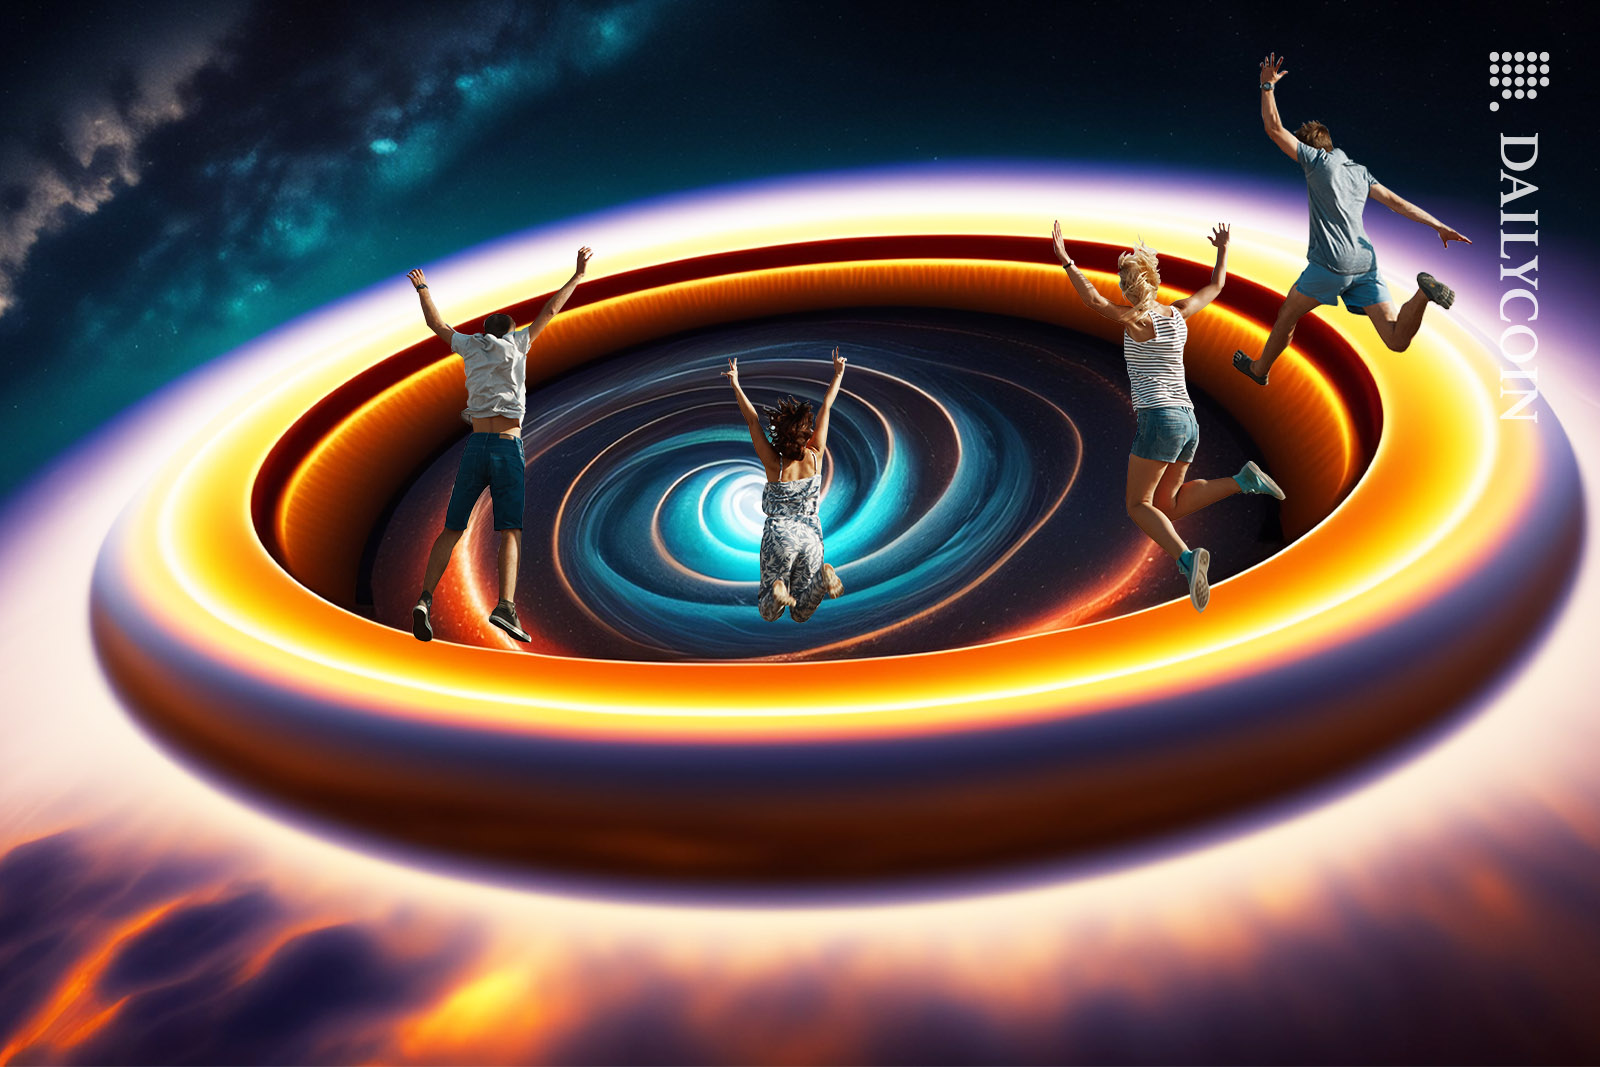 People jumping into a wormhole in space.